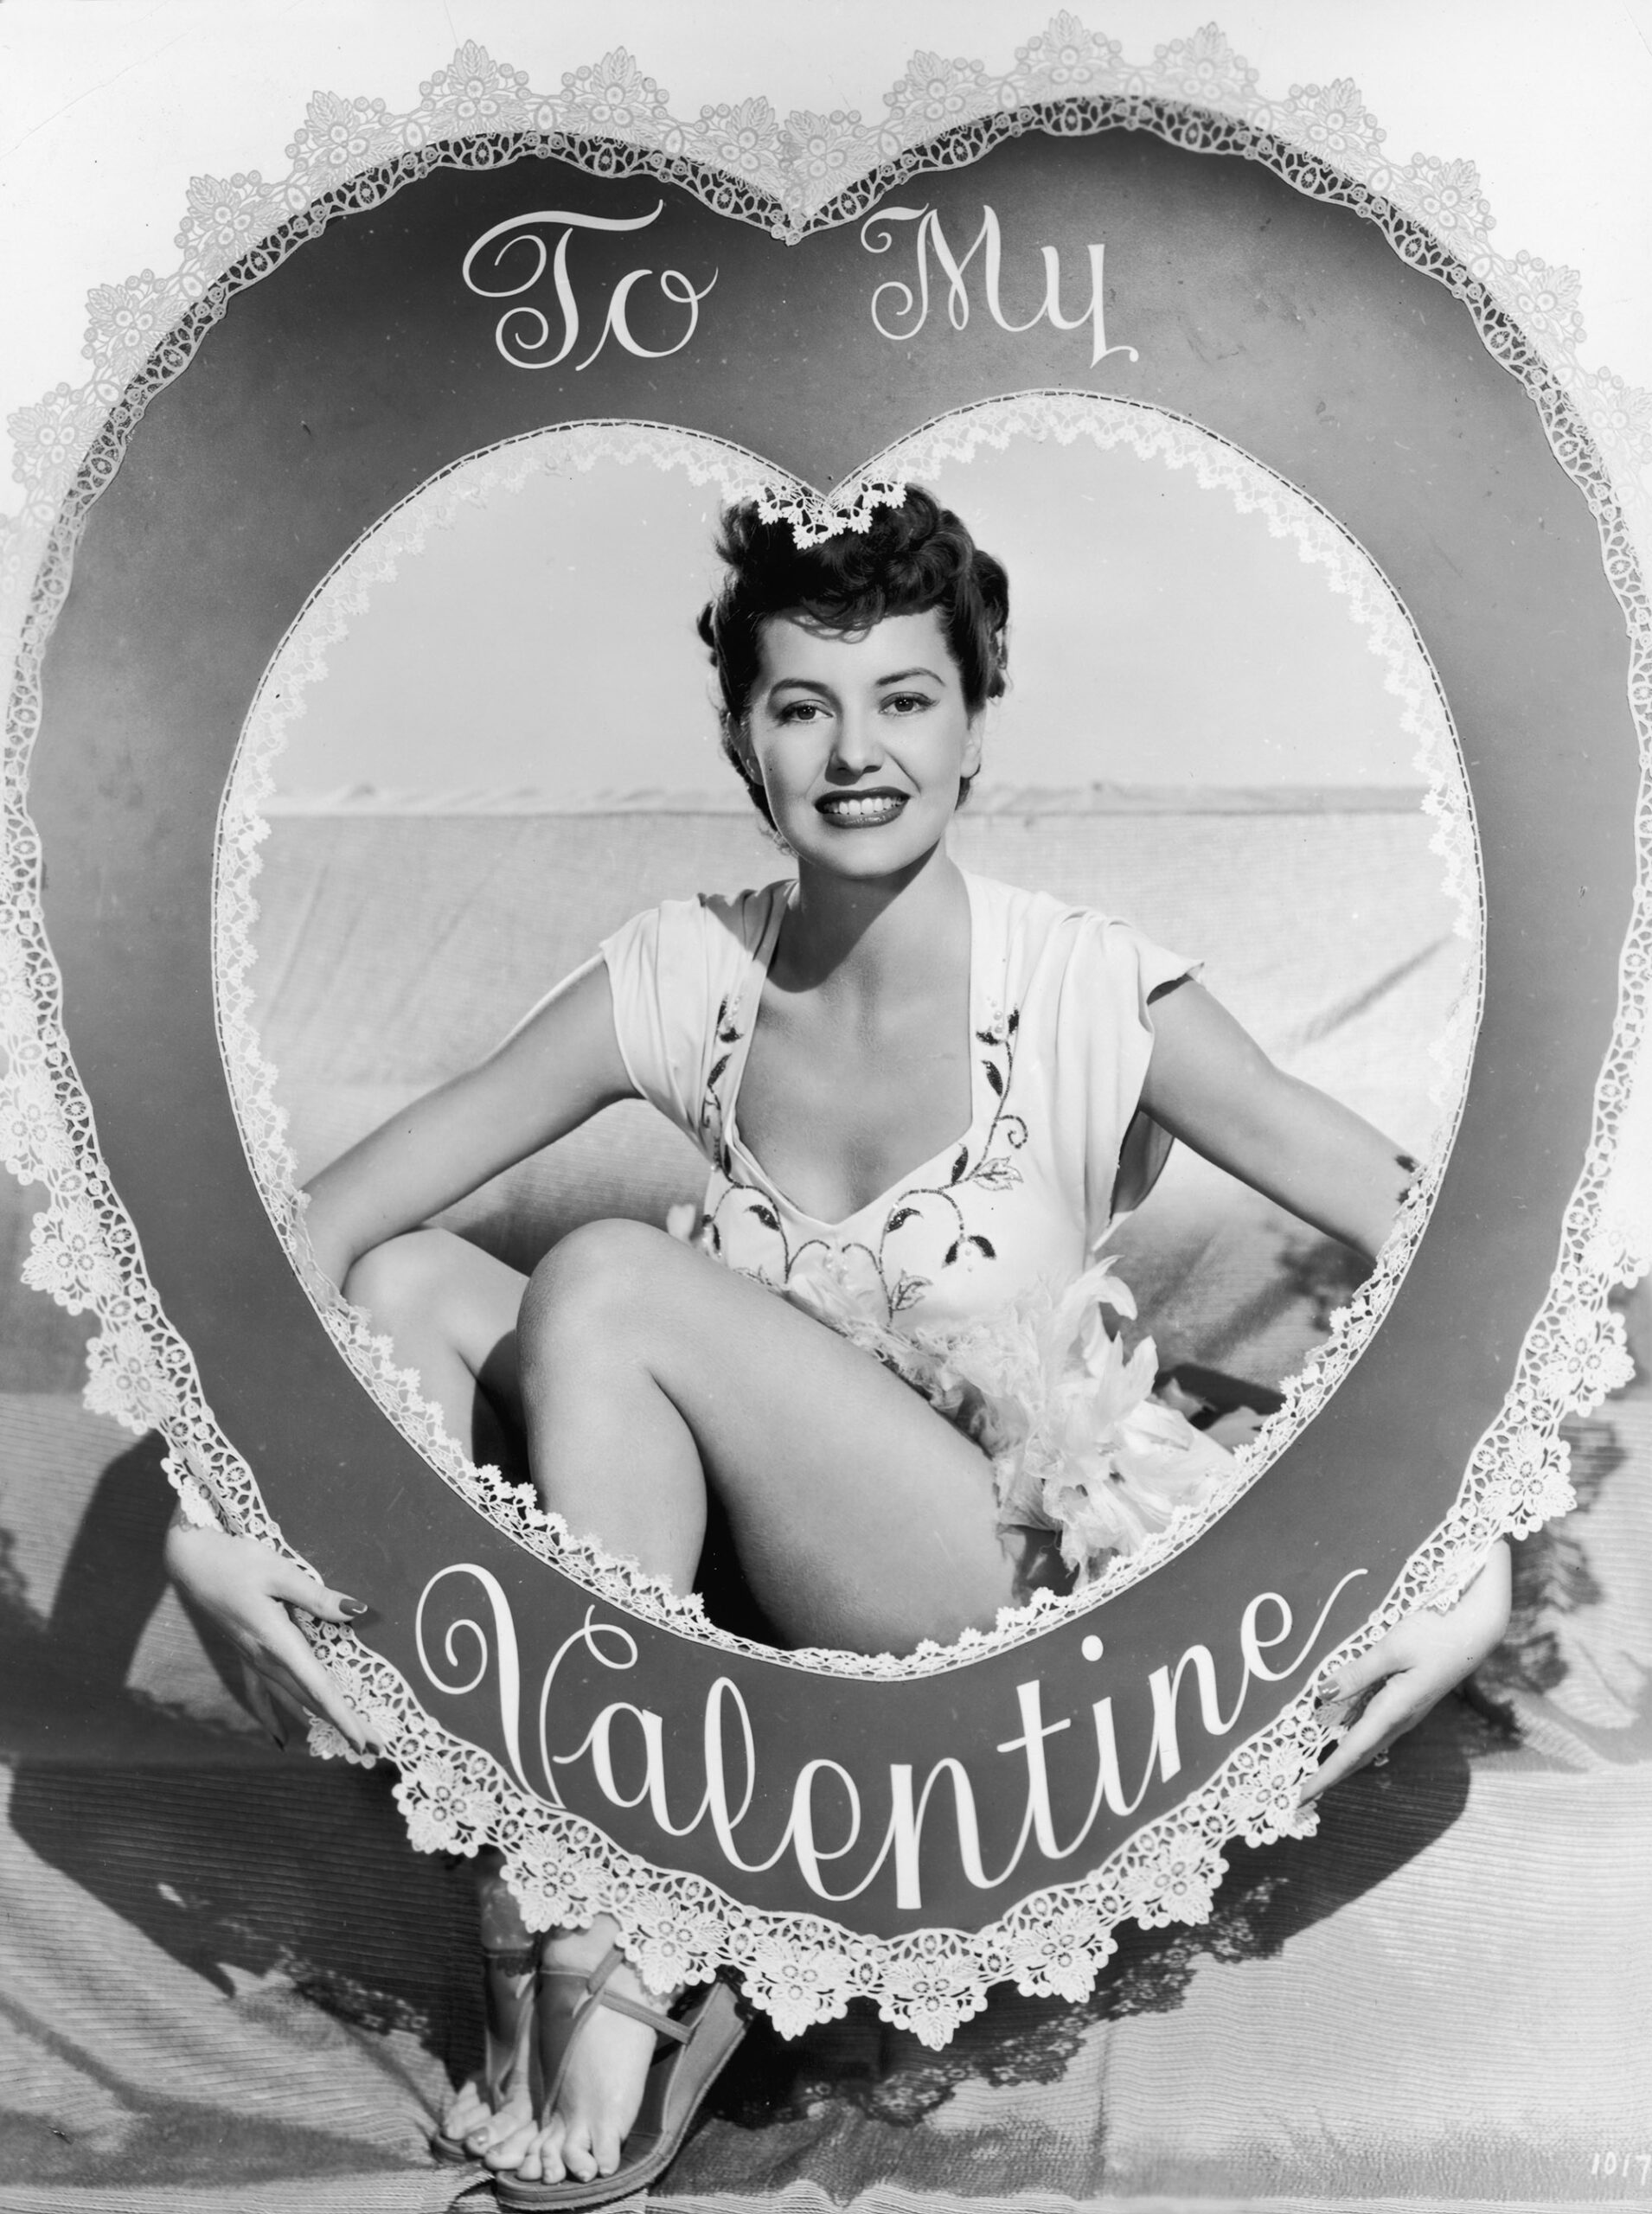 1945 studio portrait of American actor and dancer Cyd Charisse holding and smiling through a large cutout heart valentine that reads, 'To My Valentine.'